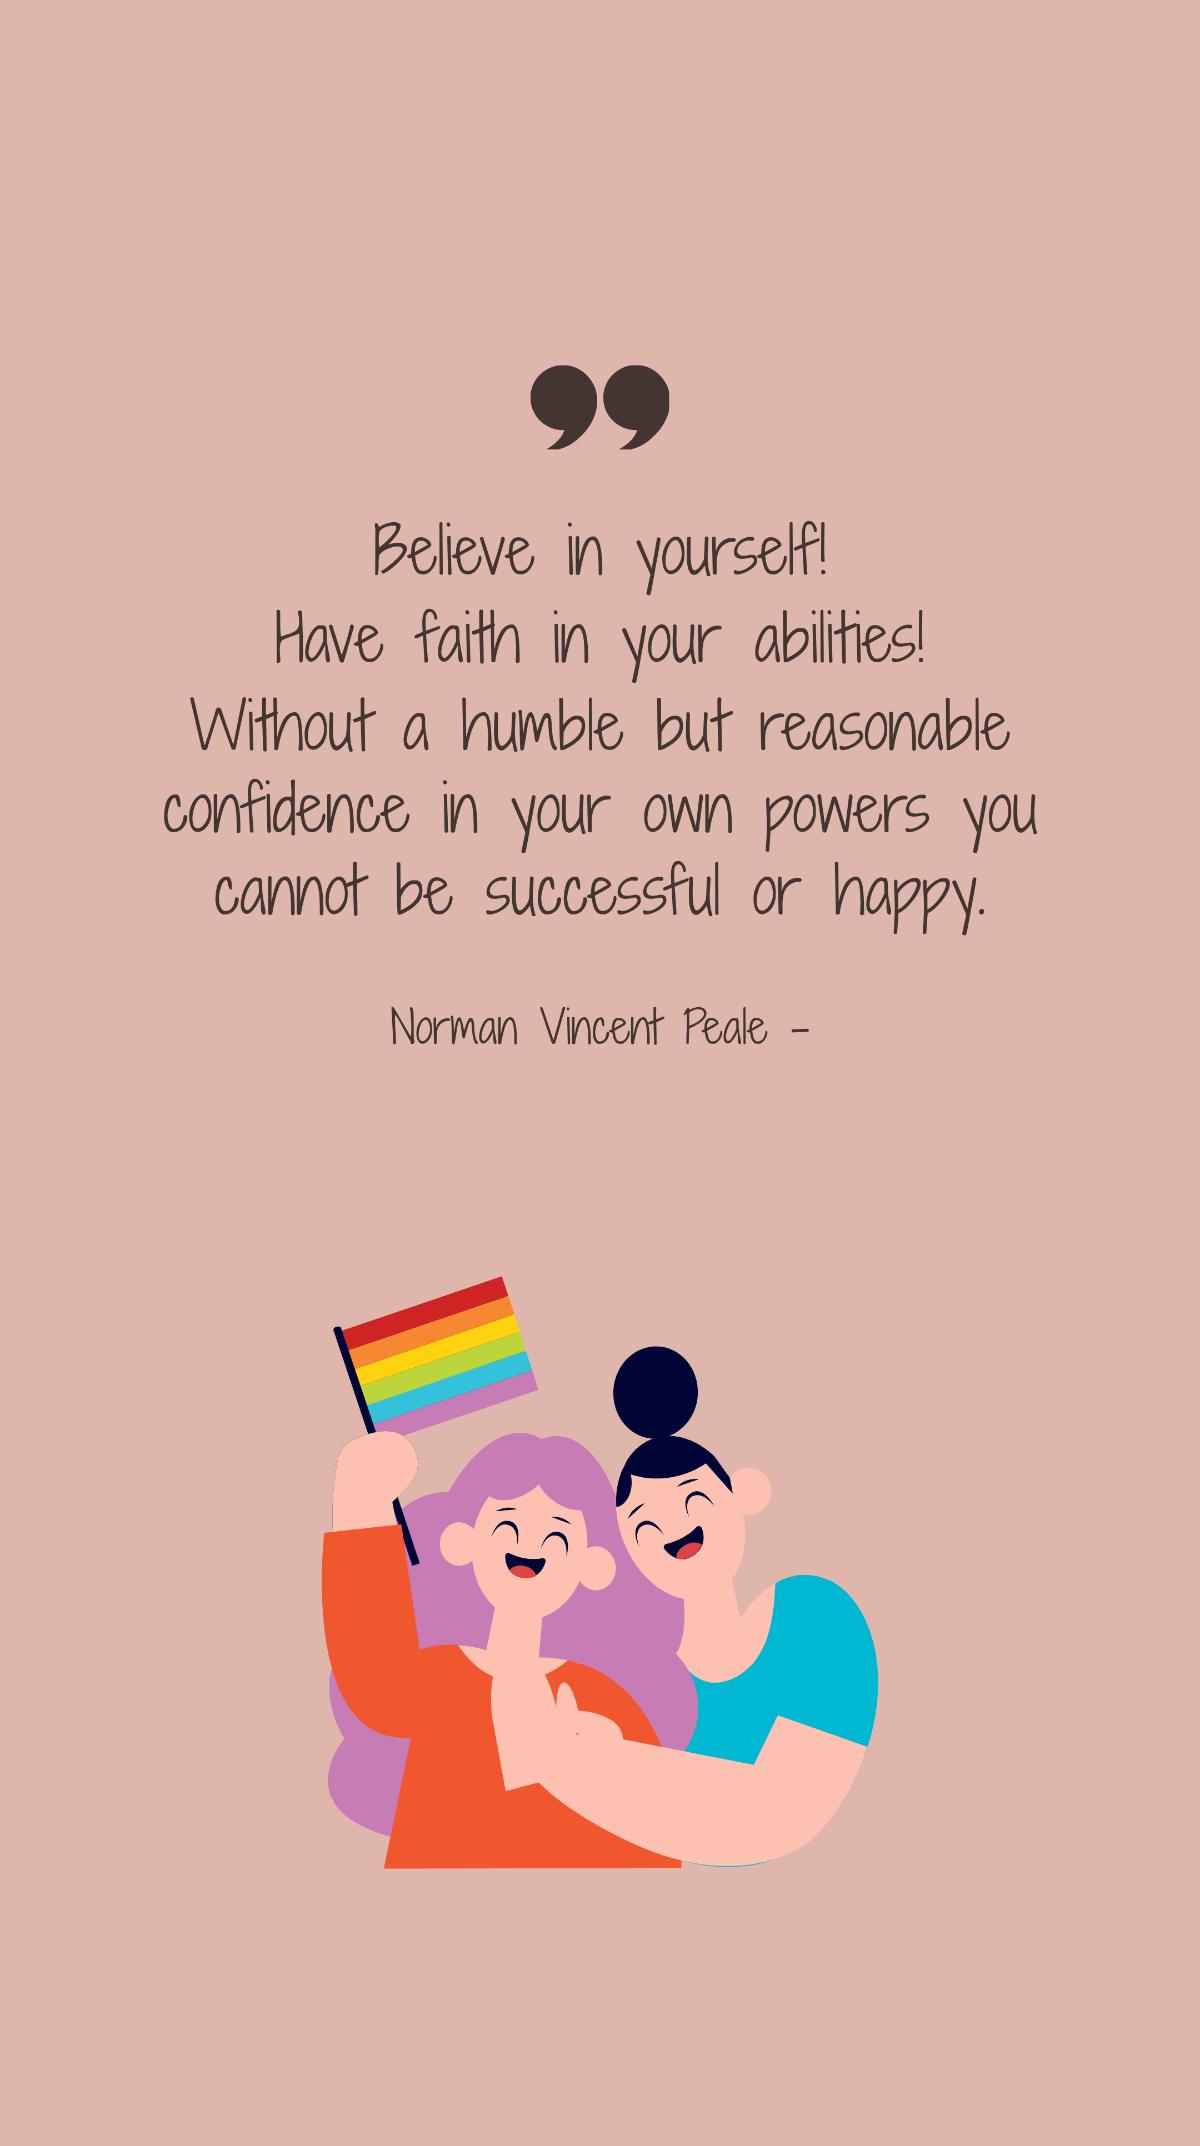 Norman Vincent Peale - Believe in yourself! Have faith in your abilities! Without a humble but reasonable confidence in your own powers you cannot be successful or happy. Template